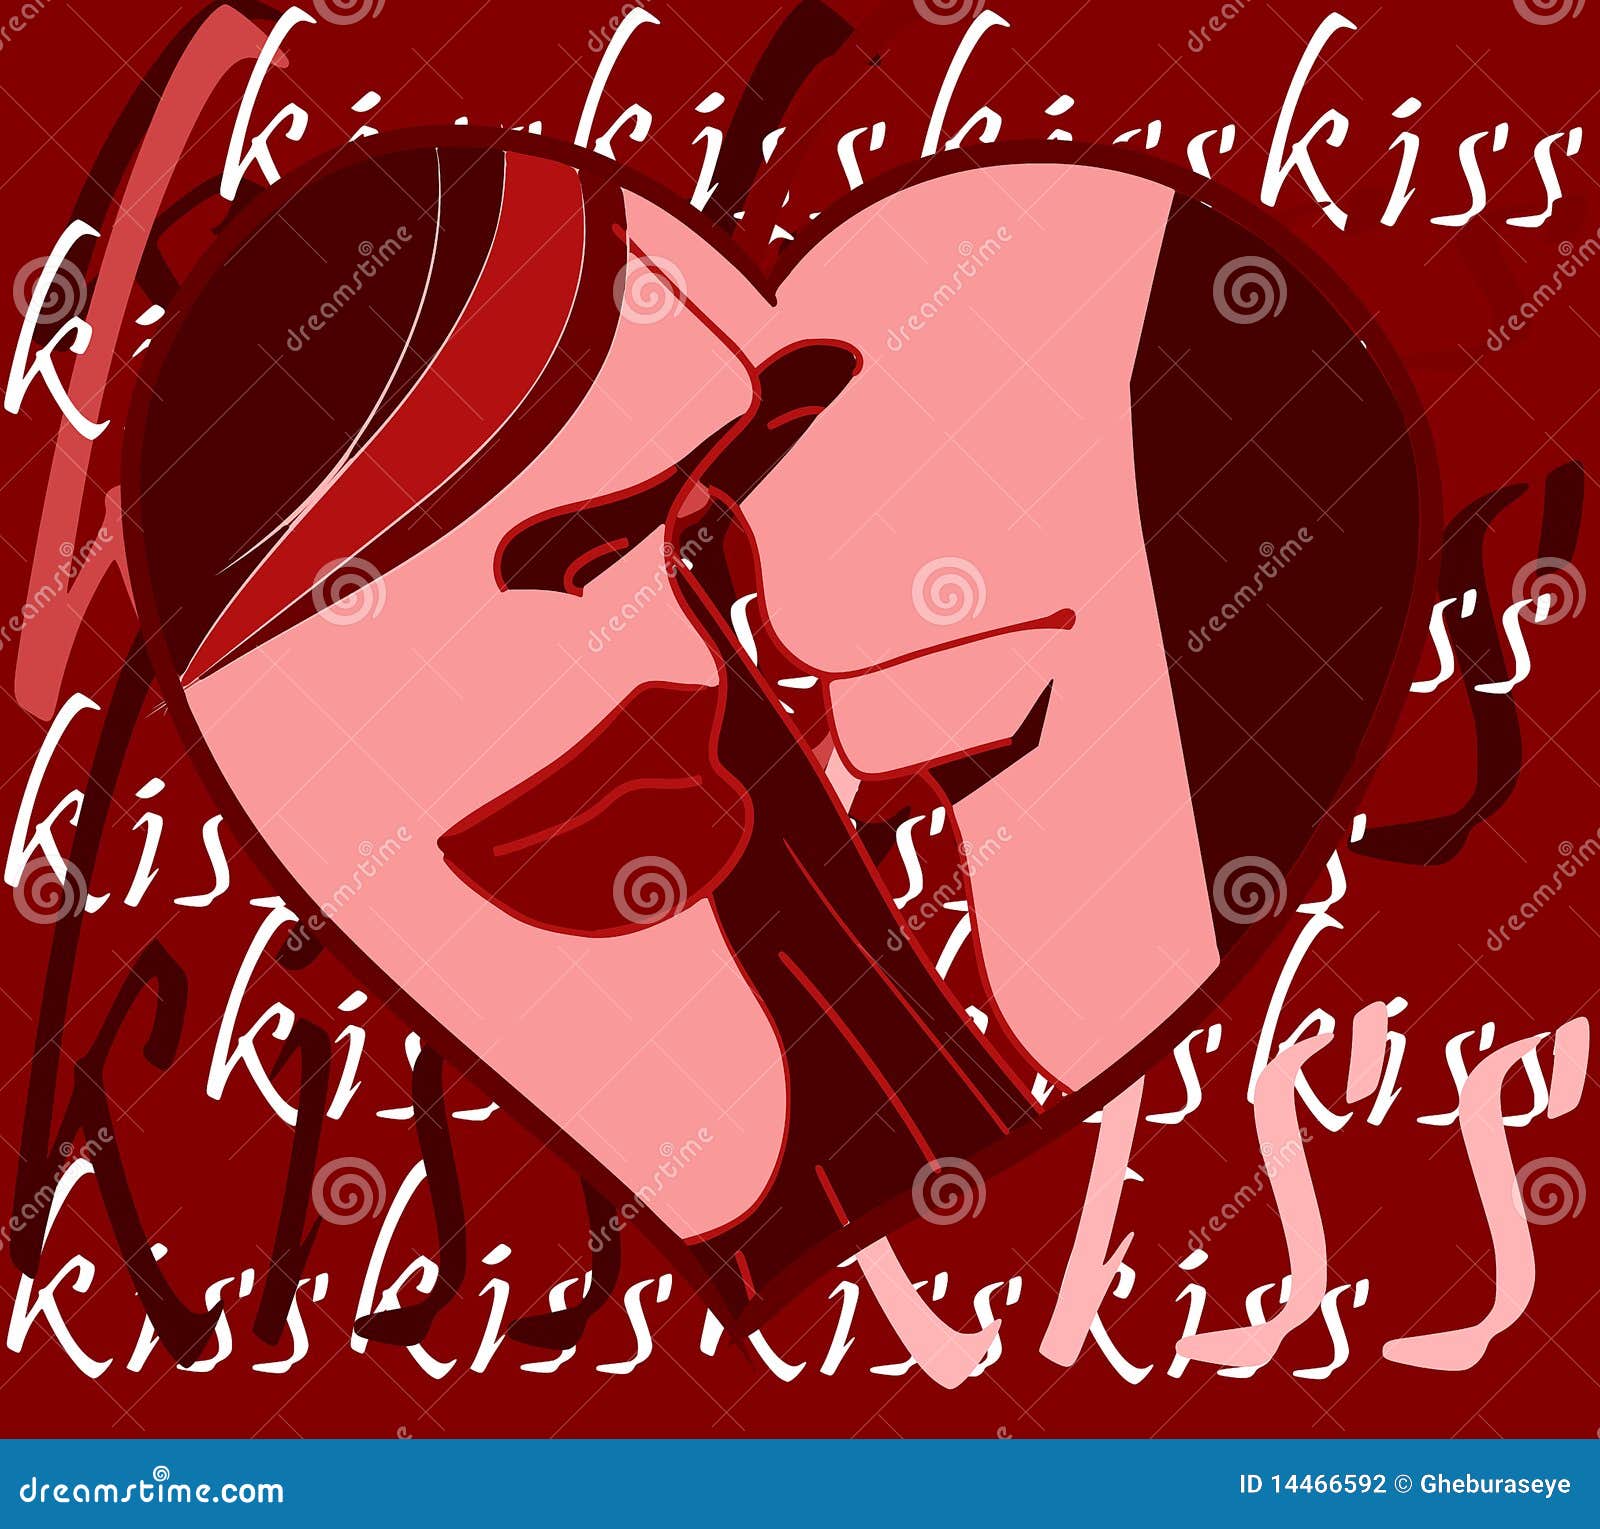 Romantic Kiss Between A Man And A Woman Red Tones Artistic Stock Illustration Illustration